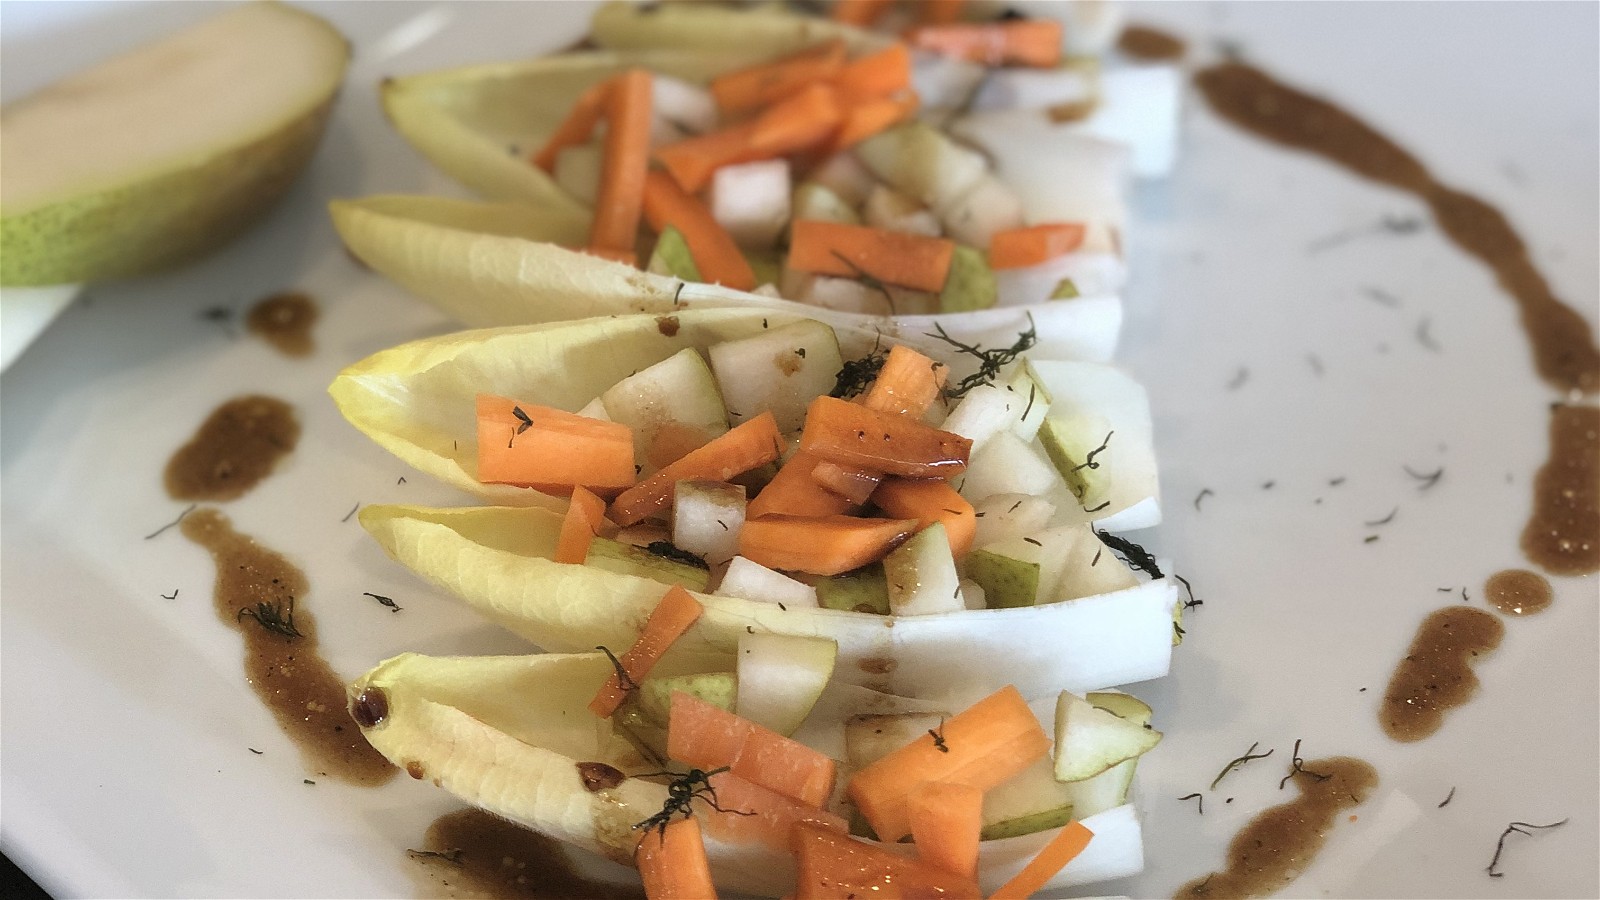 Image of Endive Salad with Pears